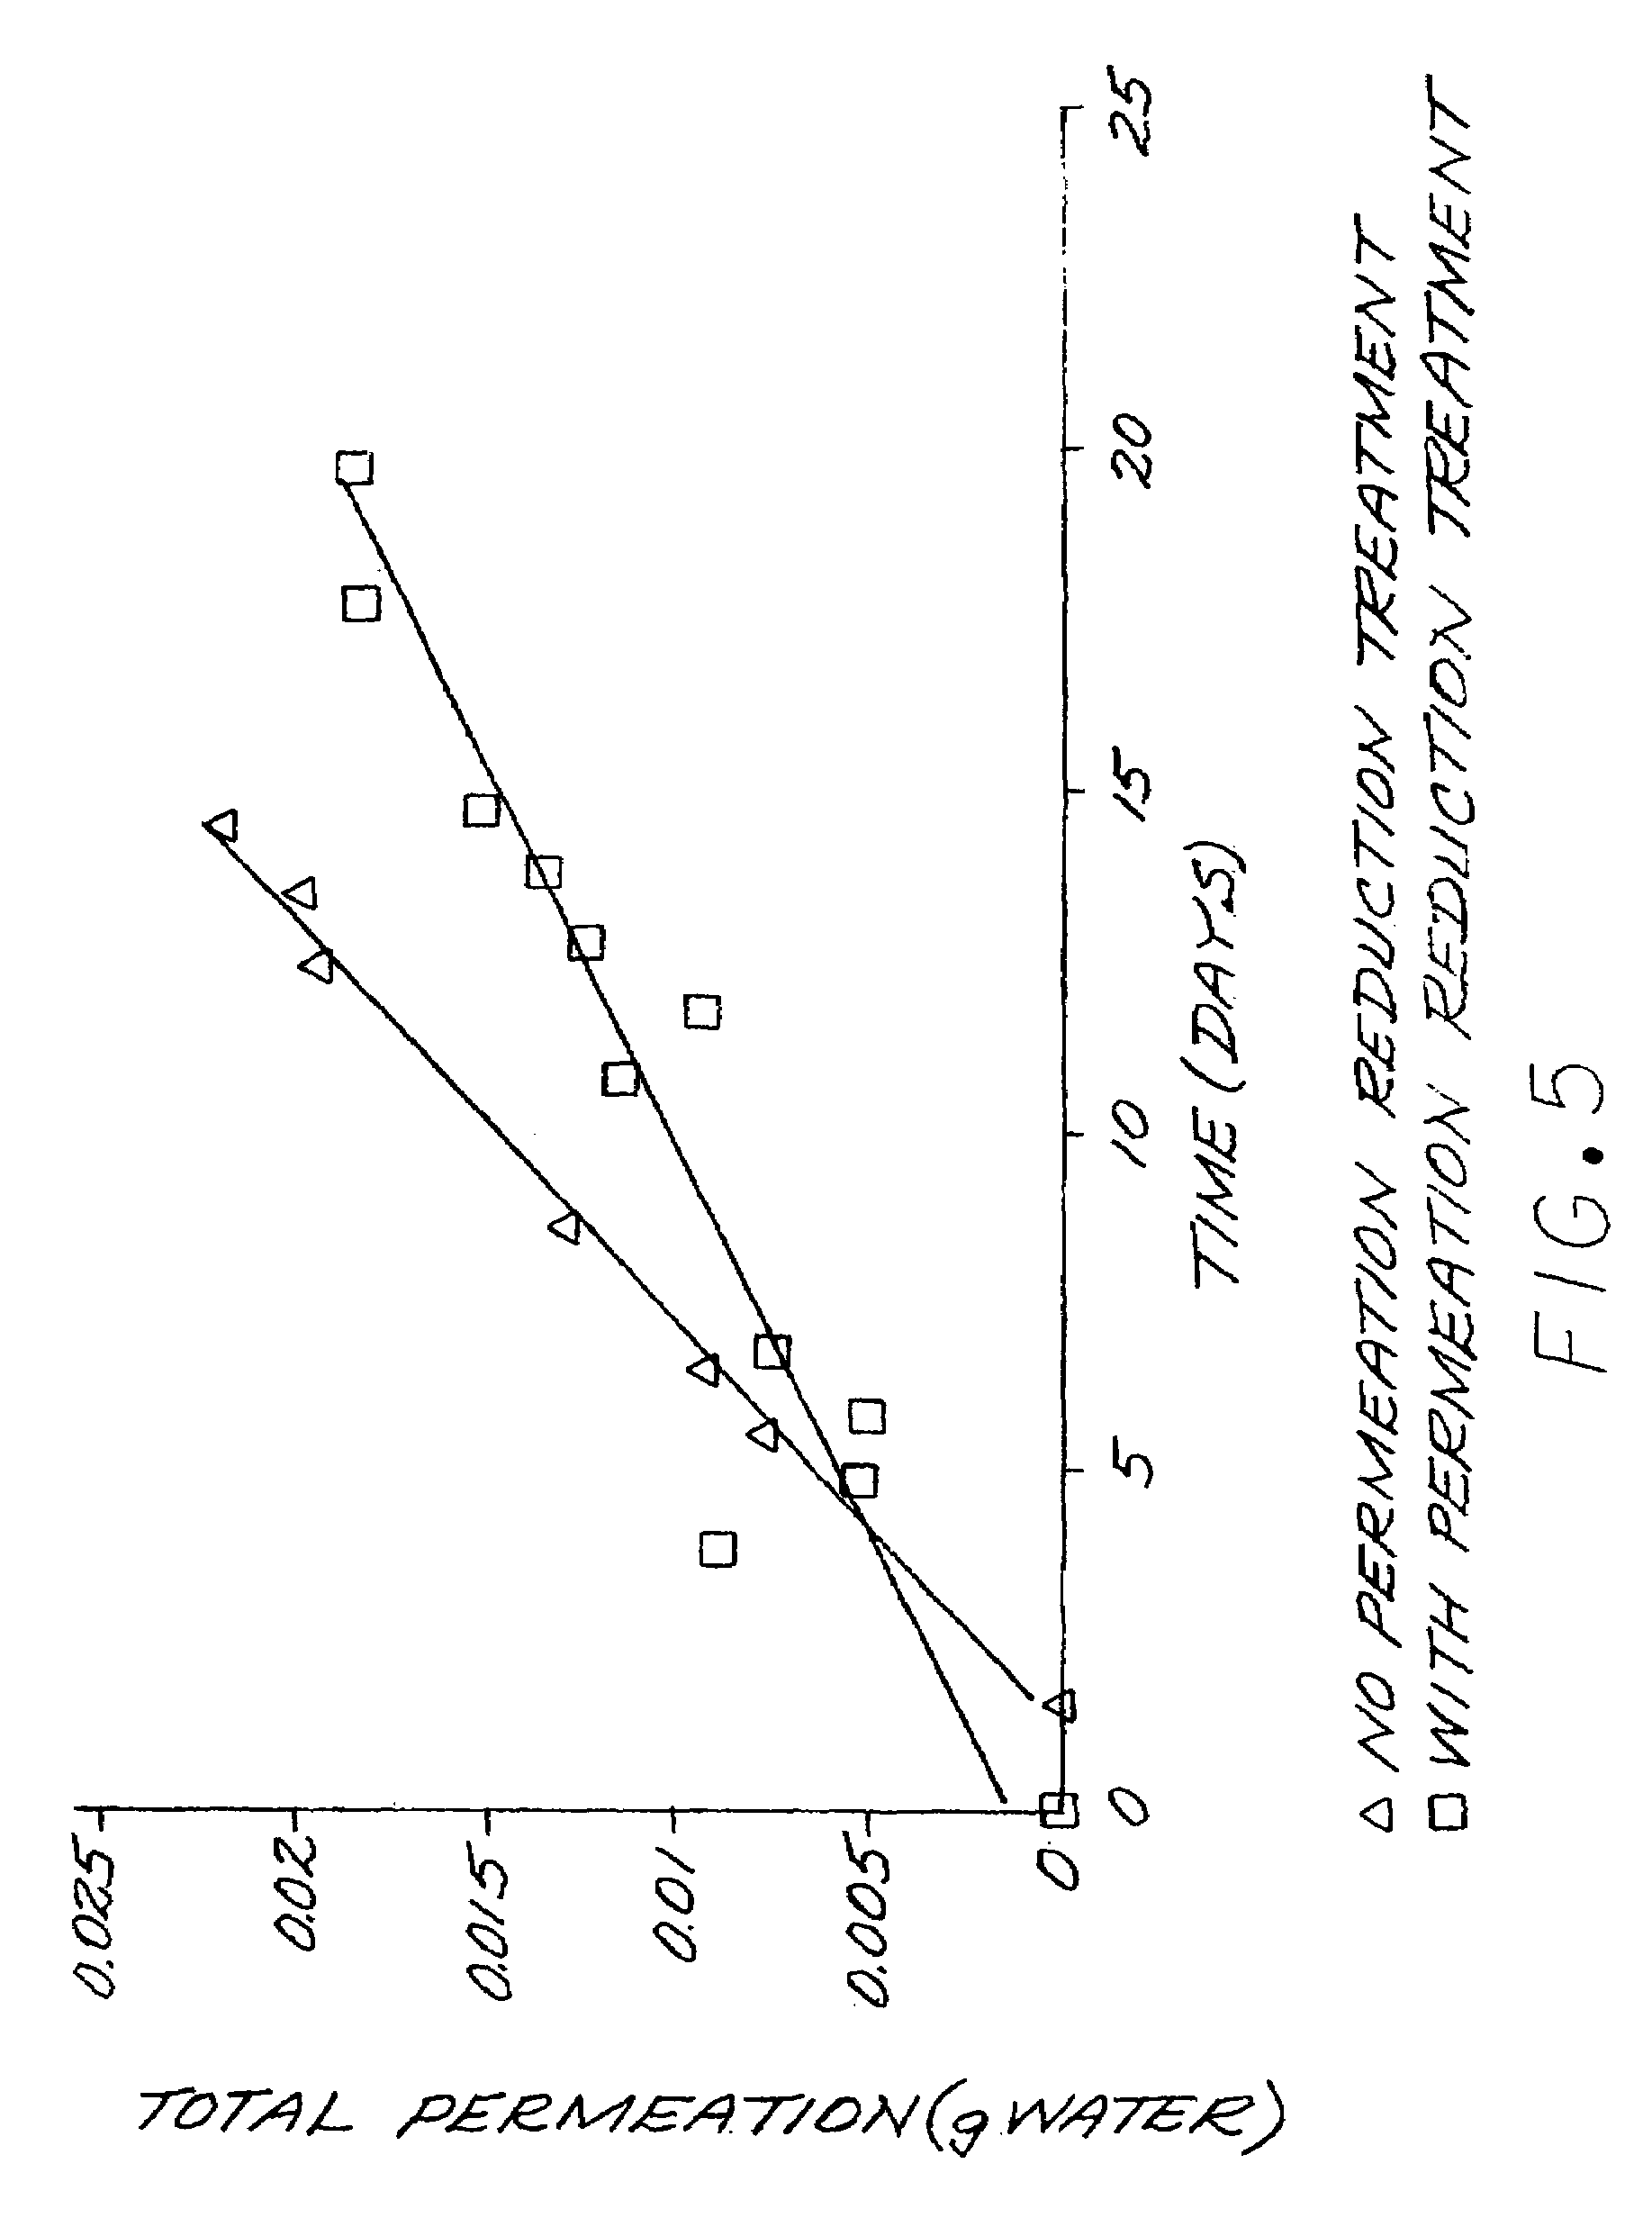 Reduction of permeation through a polymer